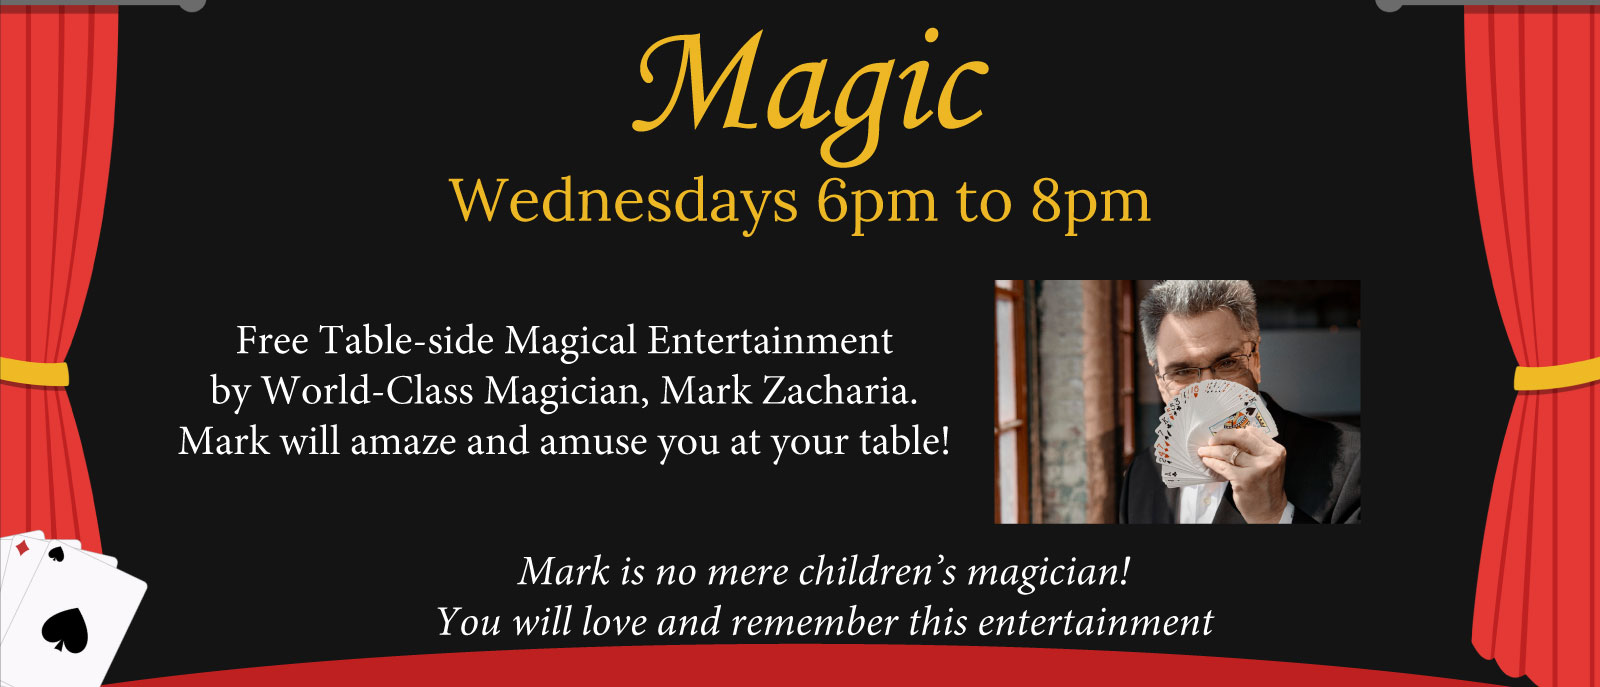 Table-side magic with Mark Zacharia Wednesdays at 6pm